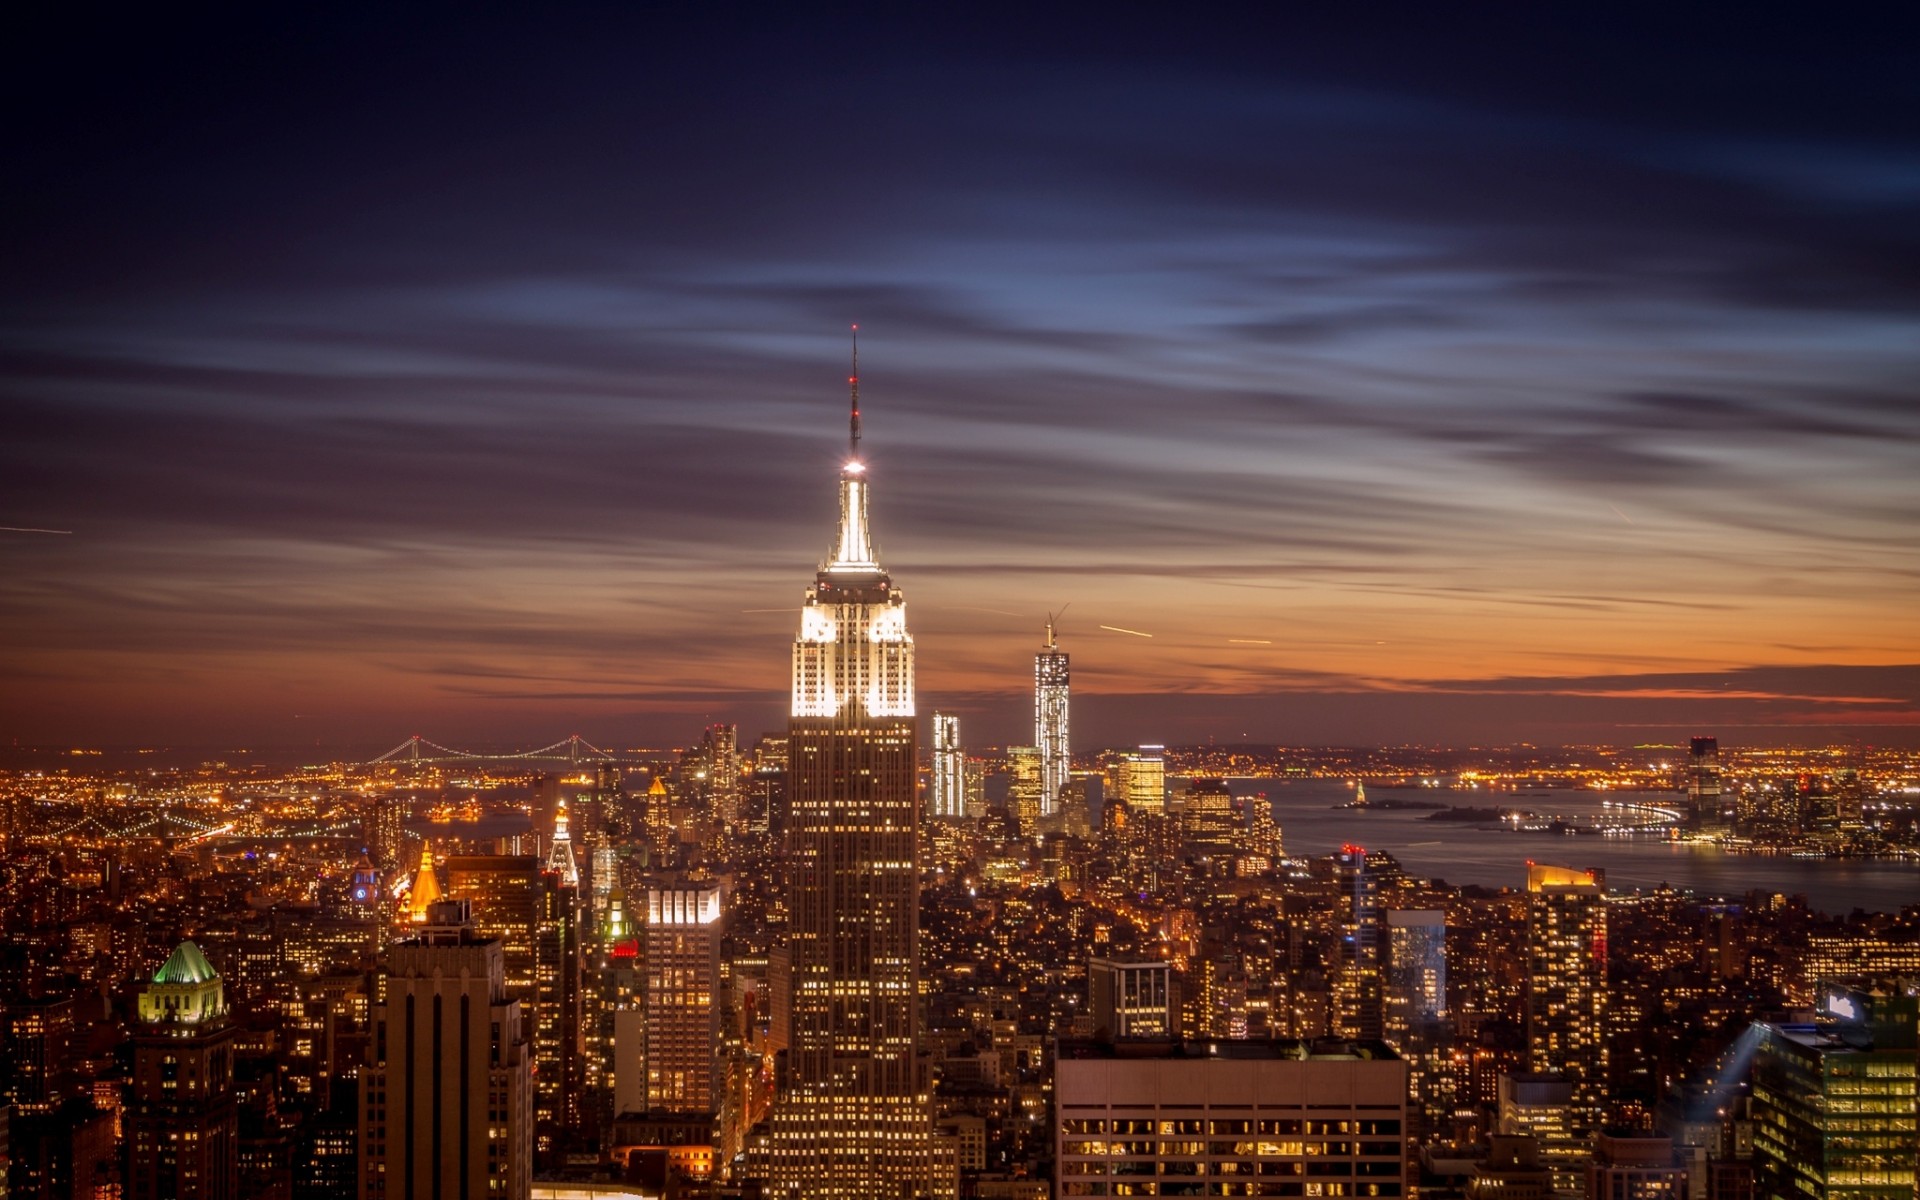 New York City Skyline And Empire State Building - New York City At Dusk - HD Wallpaper 